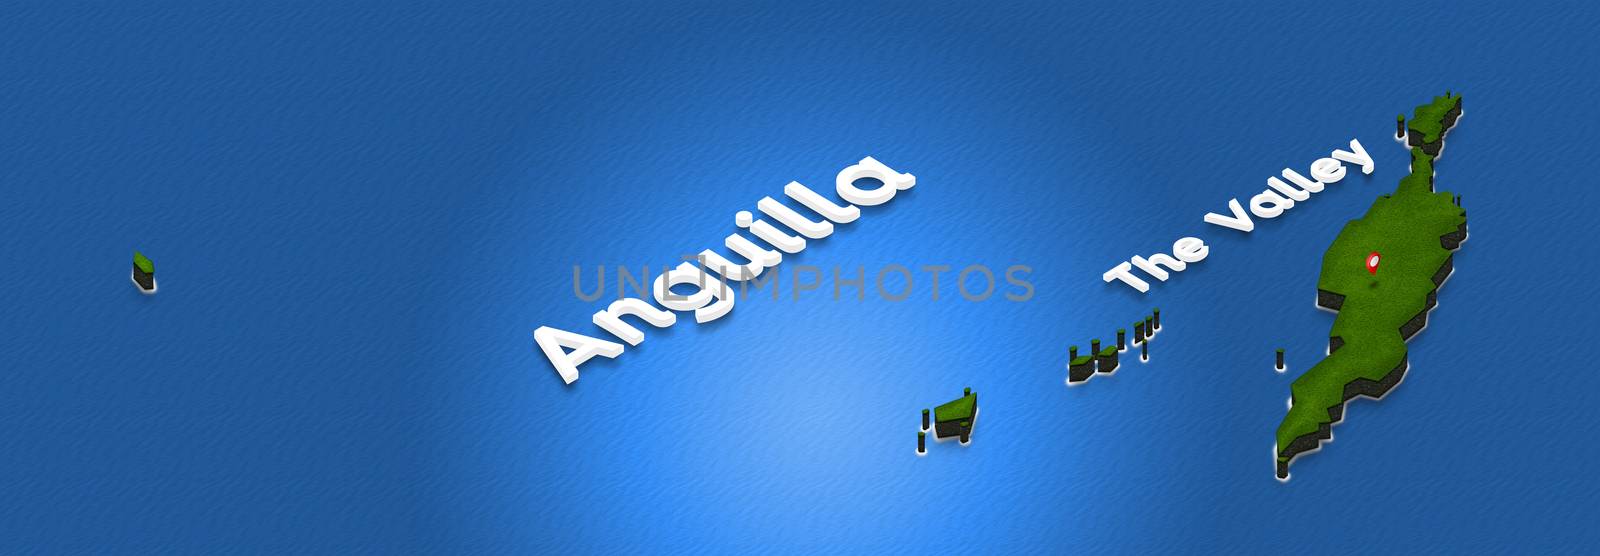 Illustration of a green ground map of Anguilla on water background. Right 3D isometric perspective projection with the name of country and capital The Valley